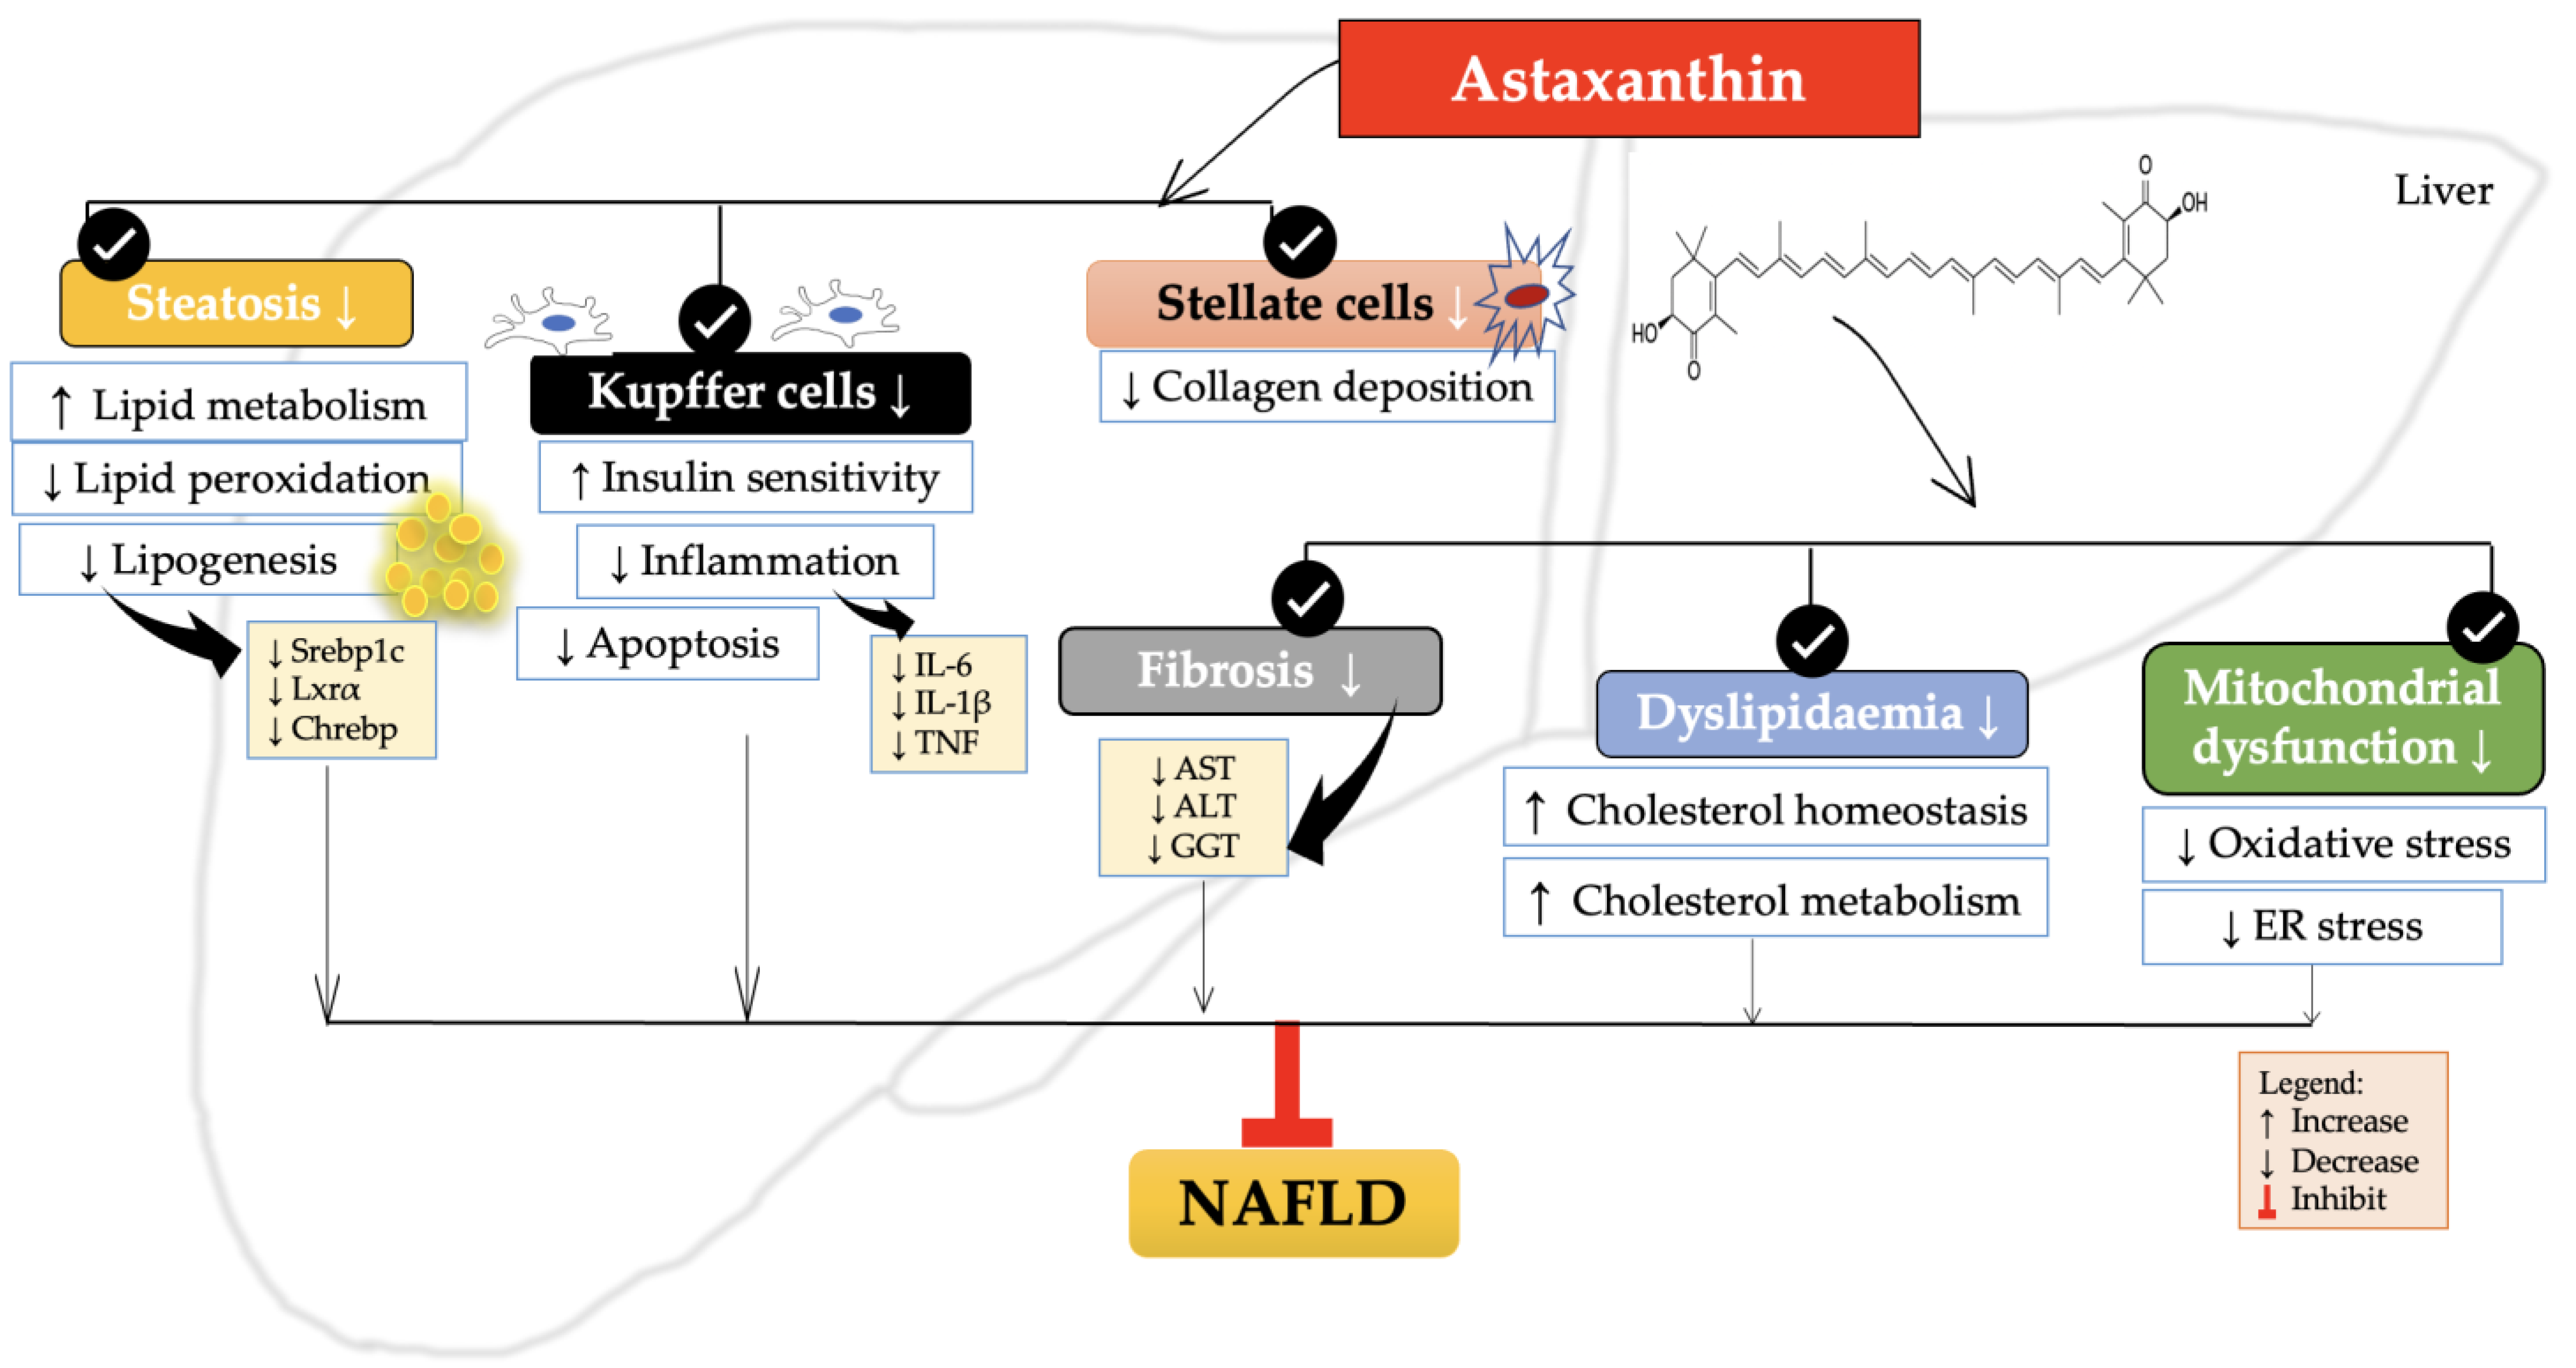 Astaxanthin and cholesterol levels